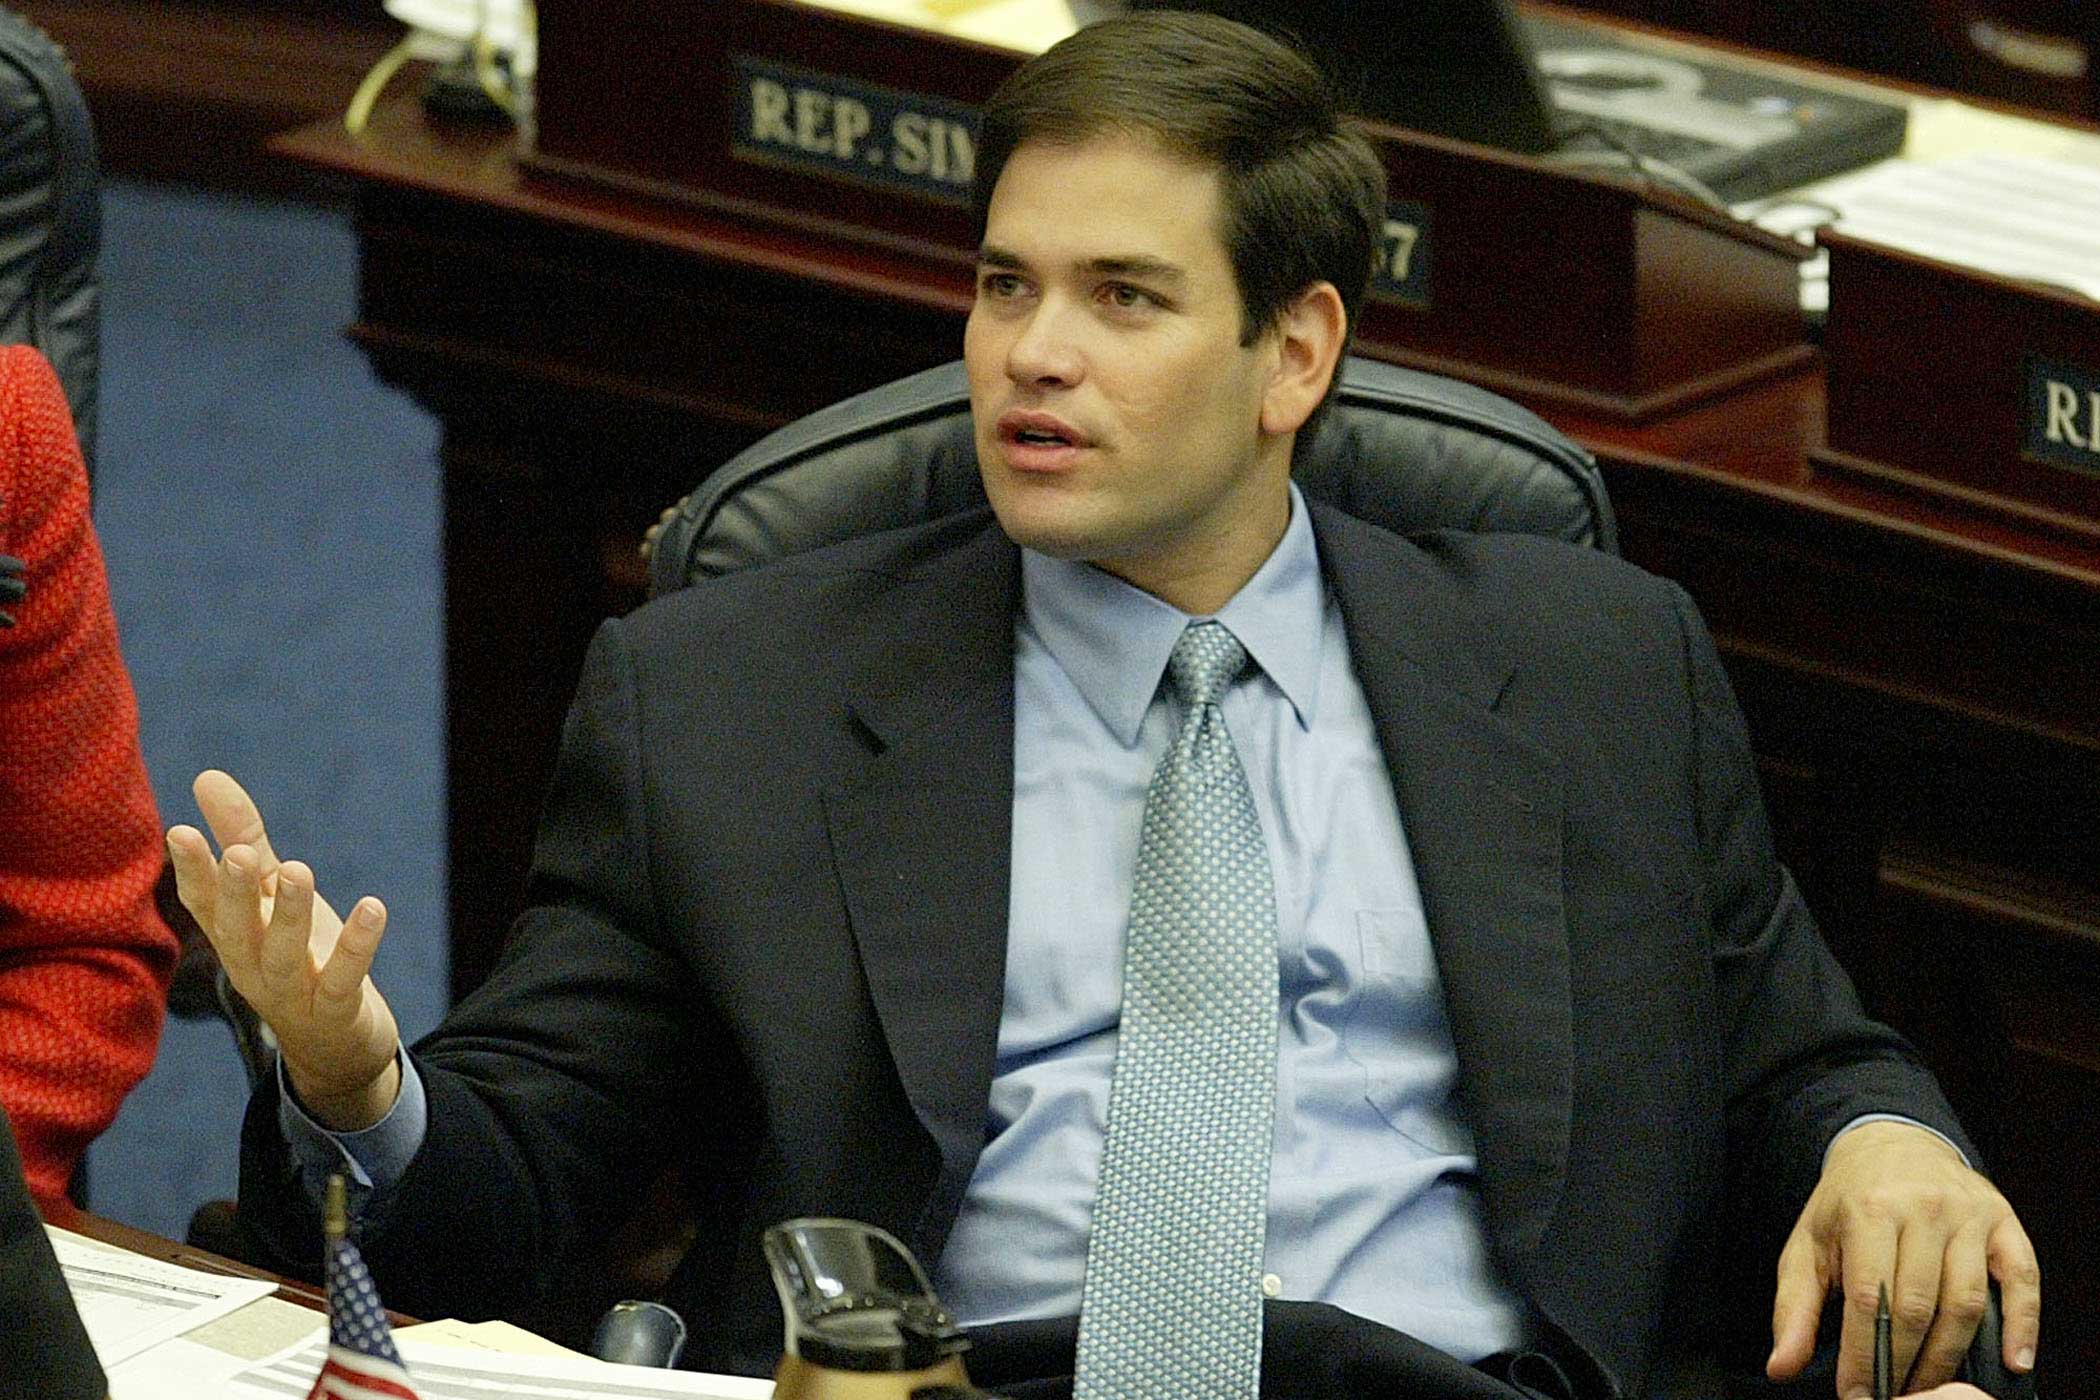 Then representative Marco Rubio talks with a colleague during House session in Tallahassee, Fla., on April 1, 2004. At age 32, Rubio was one of the youngest legislators.